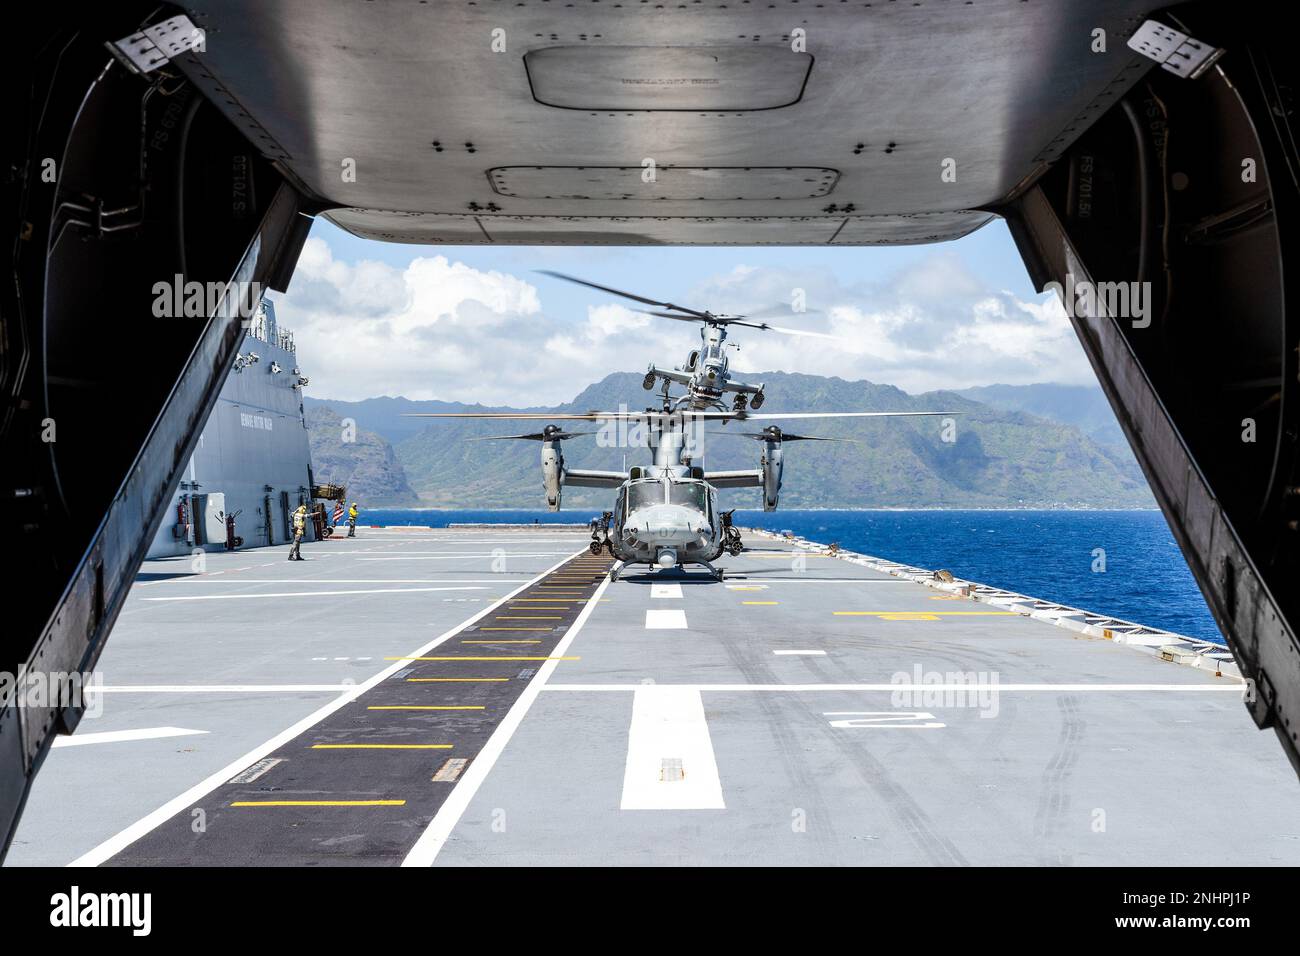 PACIFIC OCEAN (Aug. 1, 2022) A U.S. Marine Corps AH-1Z Viper helicopter launches from the flight deck of Royal Australian Navy Canberra-class landing helicopter dock HMAS Canberra (L02) during Rim of the Pacific (RIMPAC) 2022. Twenty-six nations, 38 ships, three submarines, more than 170 aircraft and 25,000 personnel are participating in RIMPAC from June 29 to Aug. 4 in and around the Hawaiian Islands and Southern California. The world's largest international maritime exercise, RIMPAC provides a unique training opportunity while fostering and sustaining cooperative relationships among particip Stock Photo